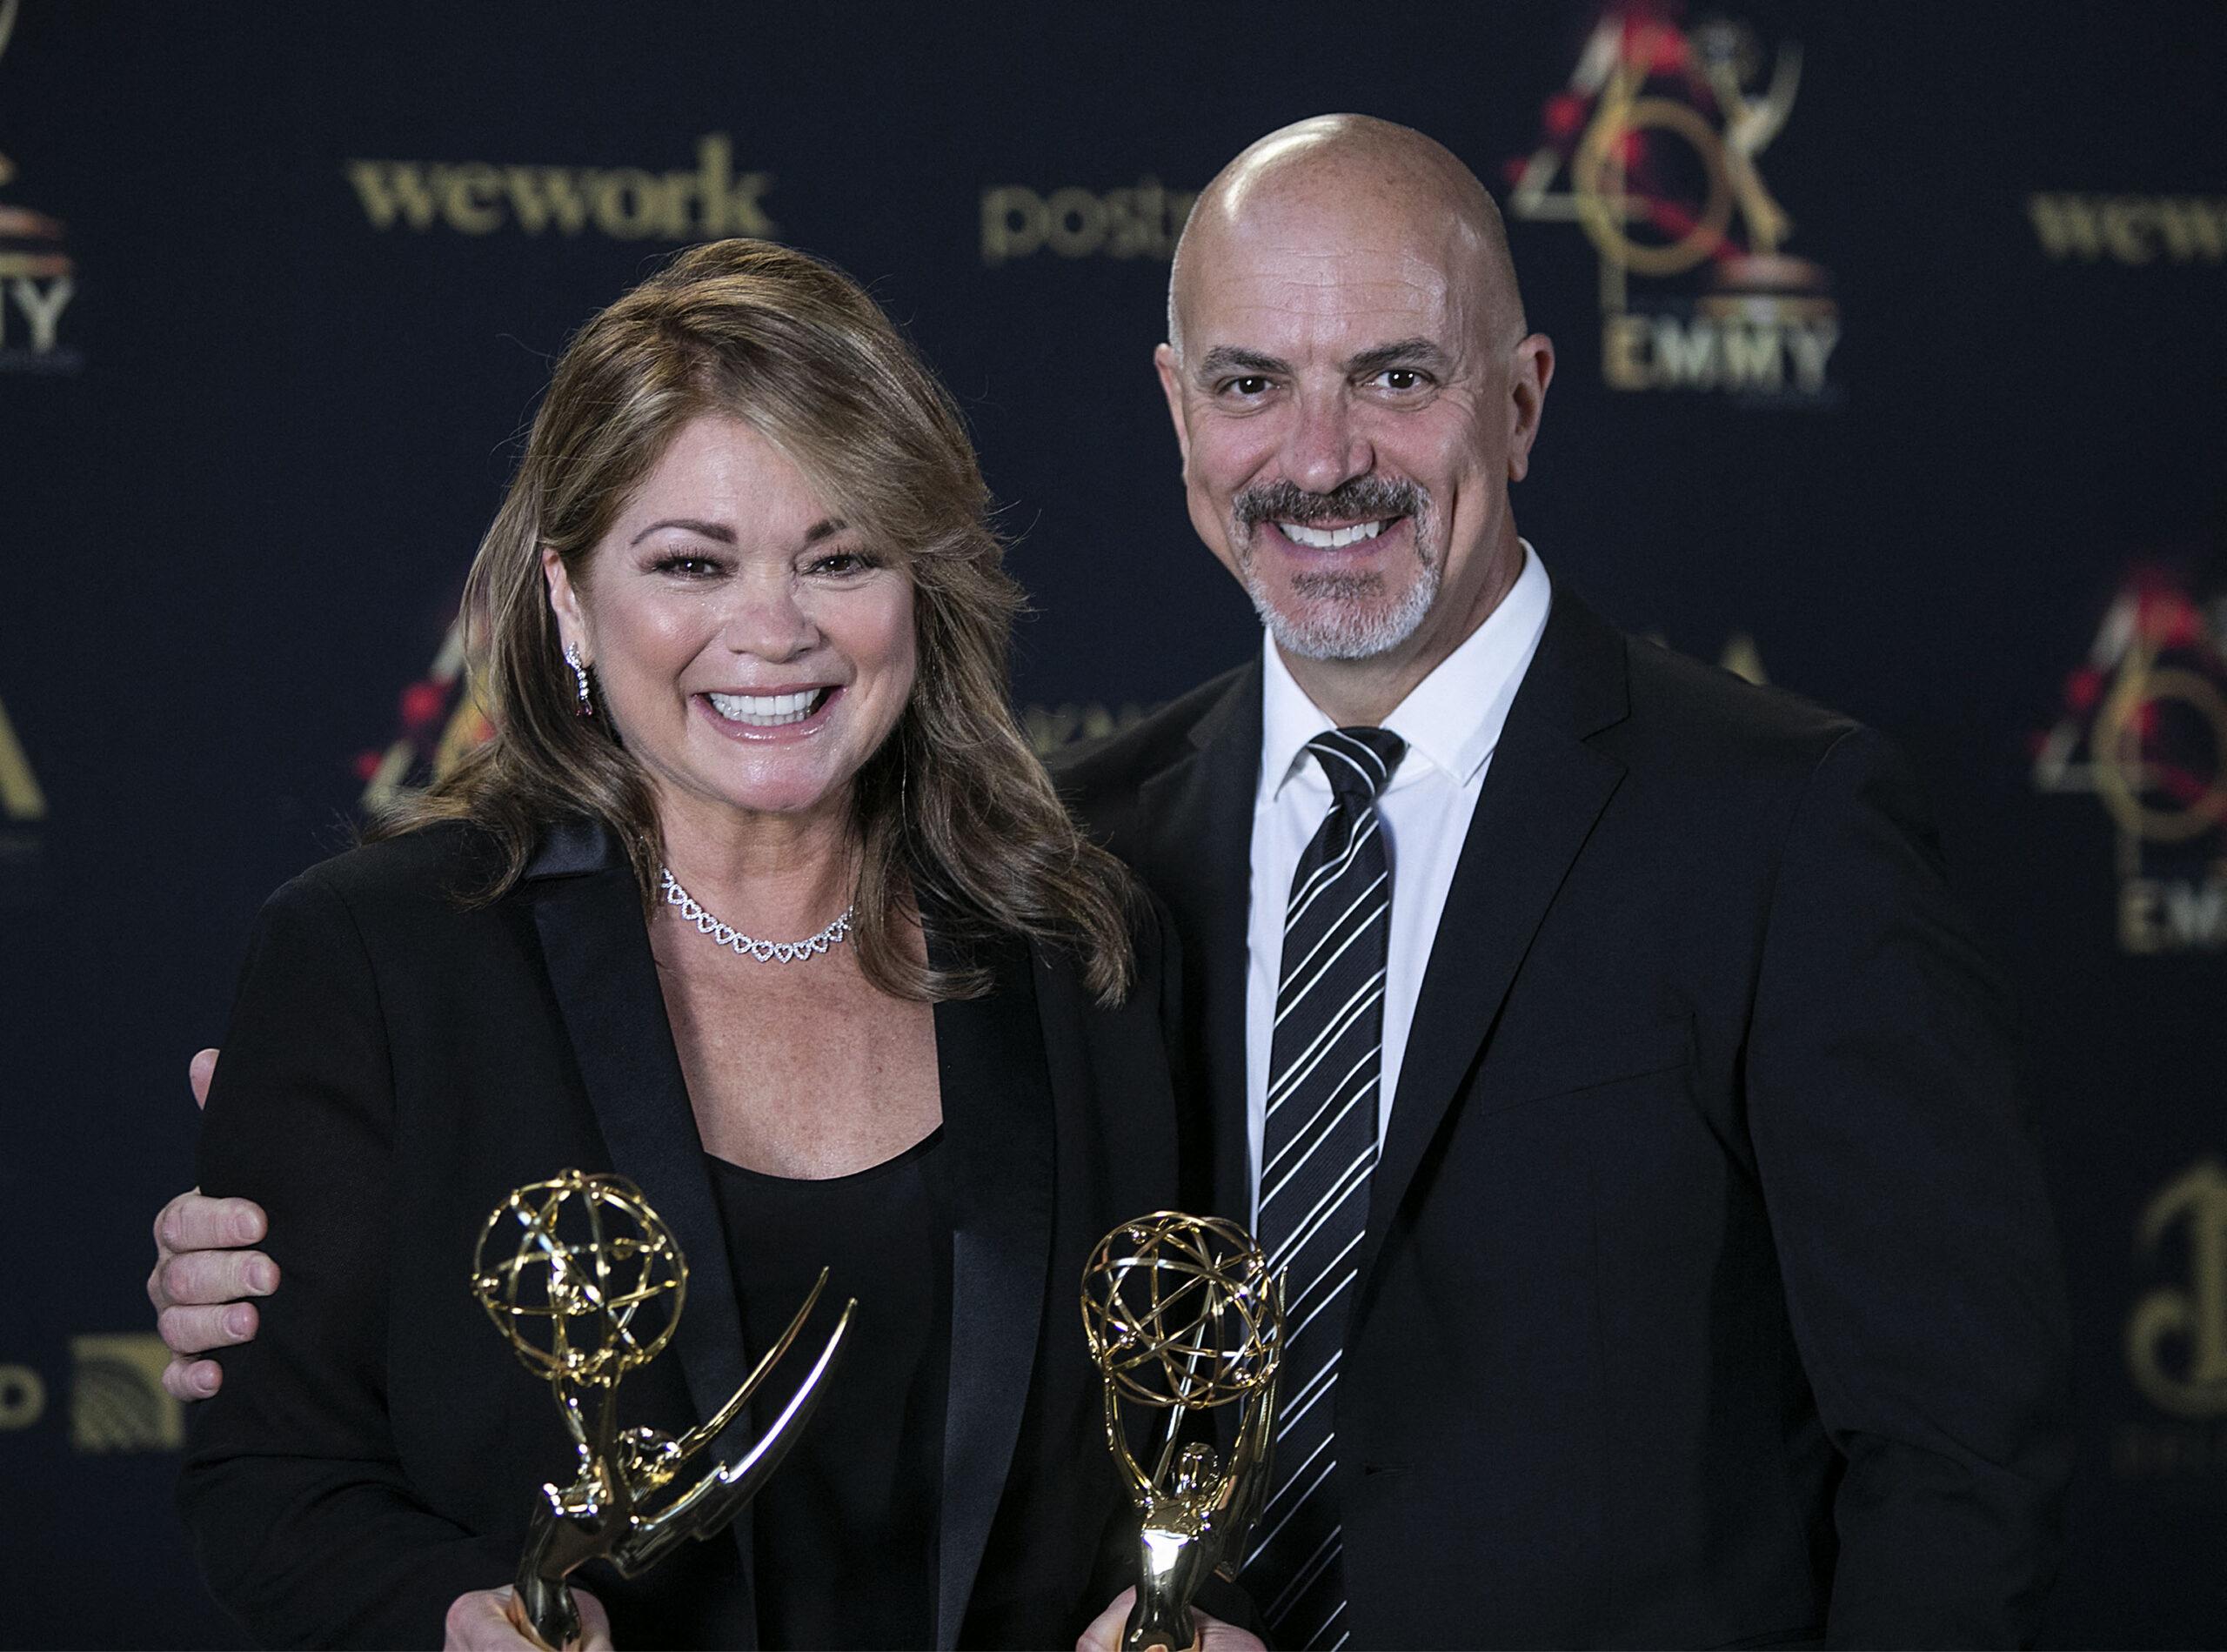 Valerie Bertinelli and Tom Vitale at the 46th Annual Daytime Emmy